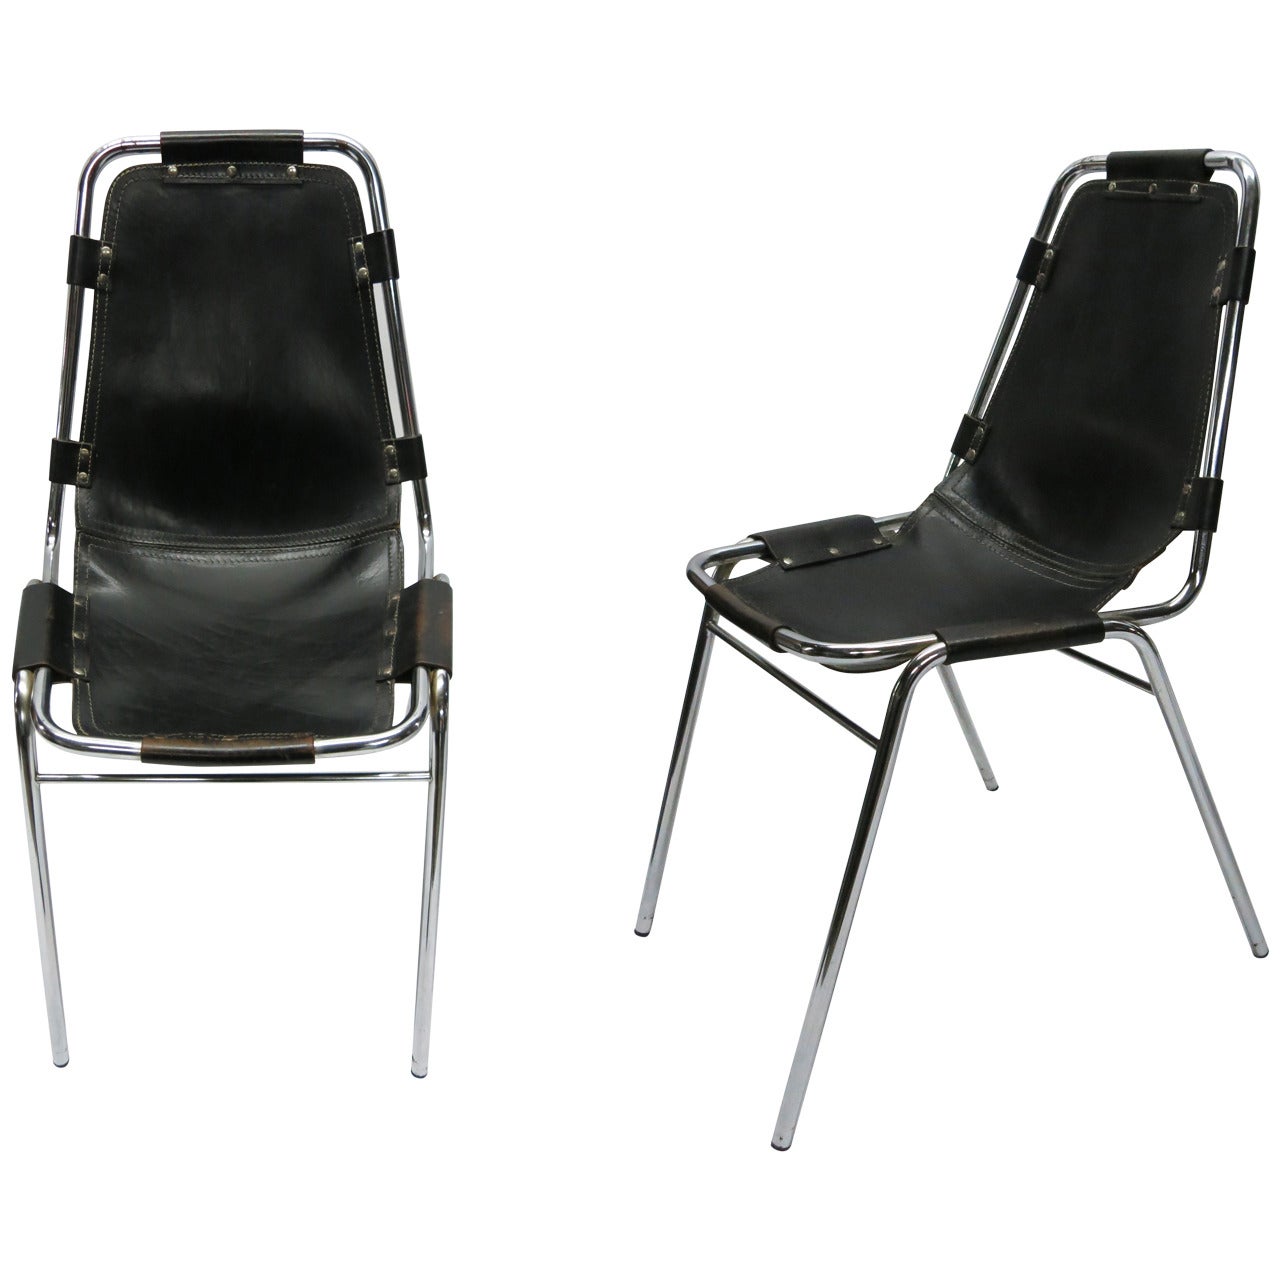 Pair of Original Chairs by Charlotte Perriand, circa 1950 Made in France